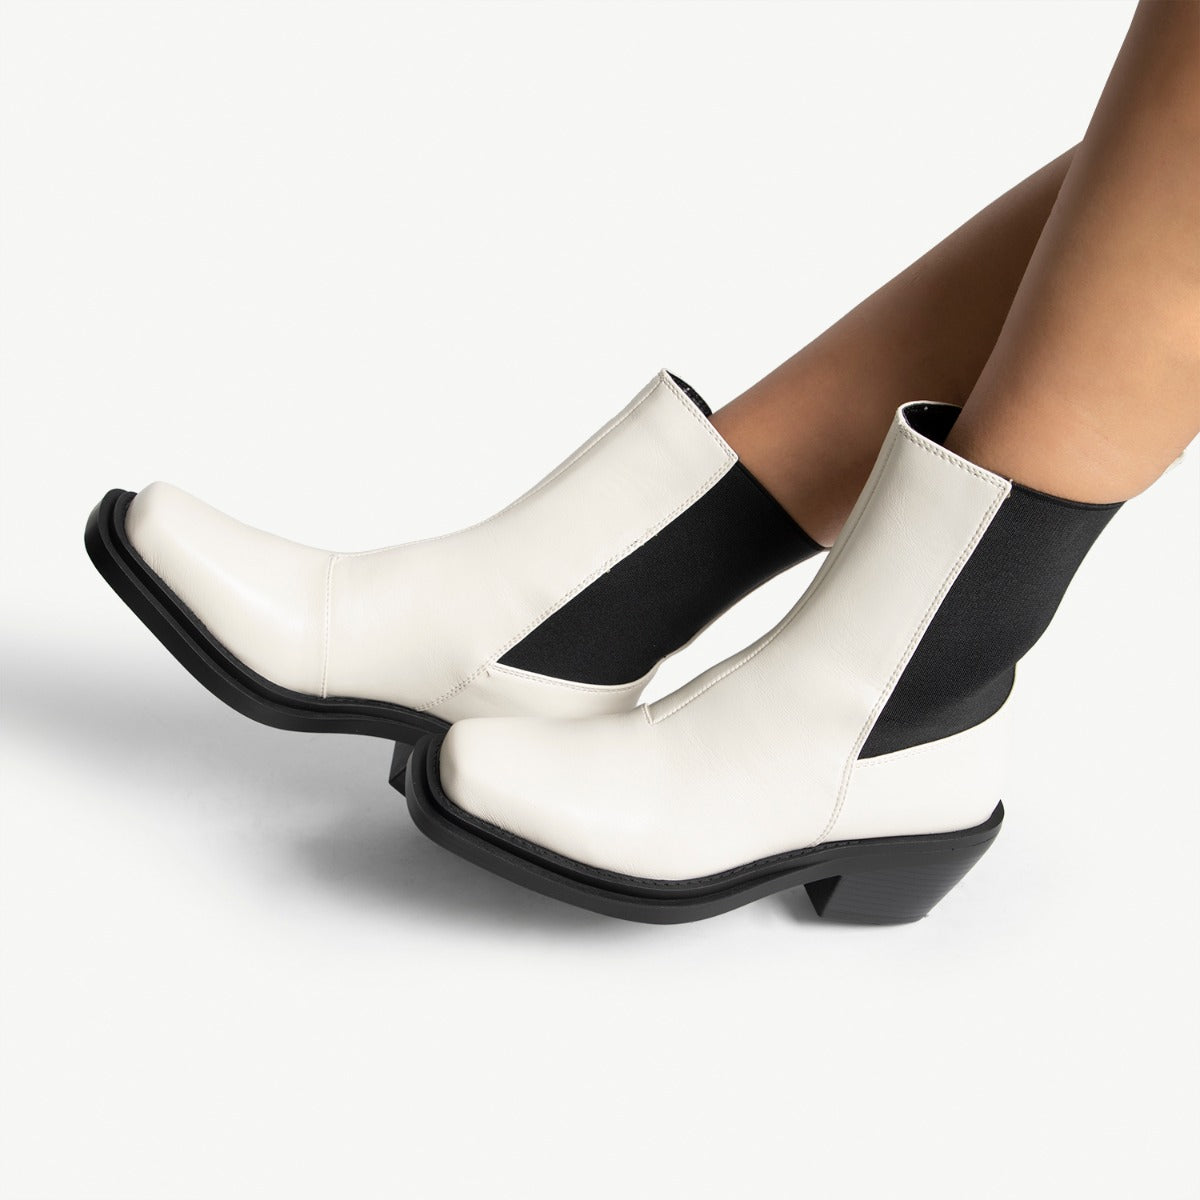 RAID Odette Ankle Boot in White